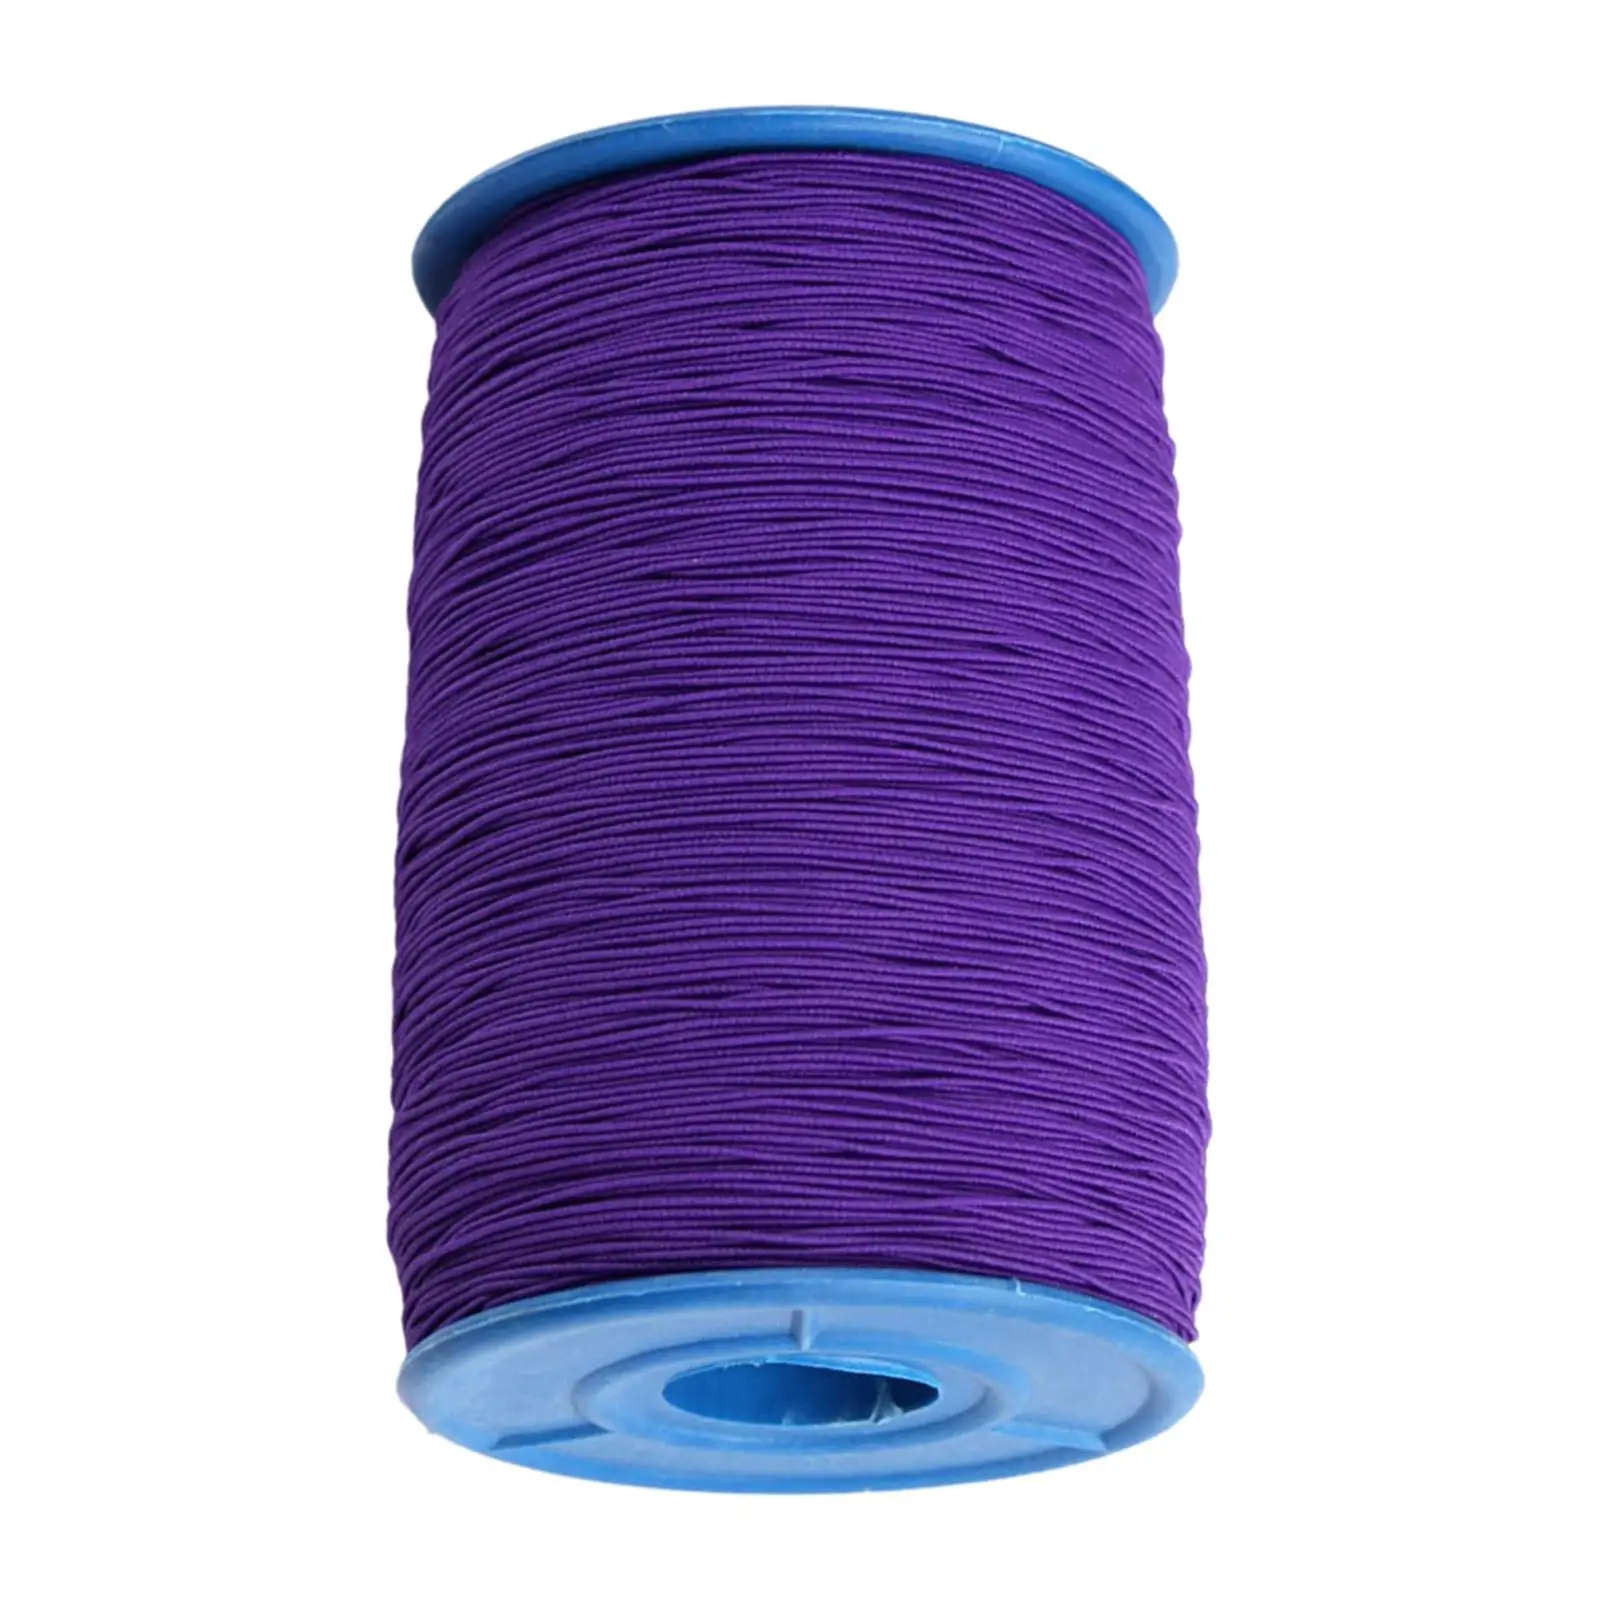 Rubber Elastic Rope Accessories 450M Knitting Elastic Band Clothing for Kayaks Bracelet